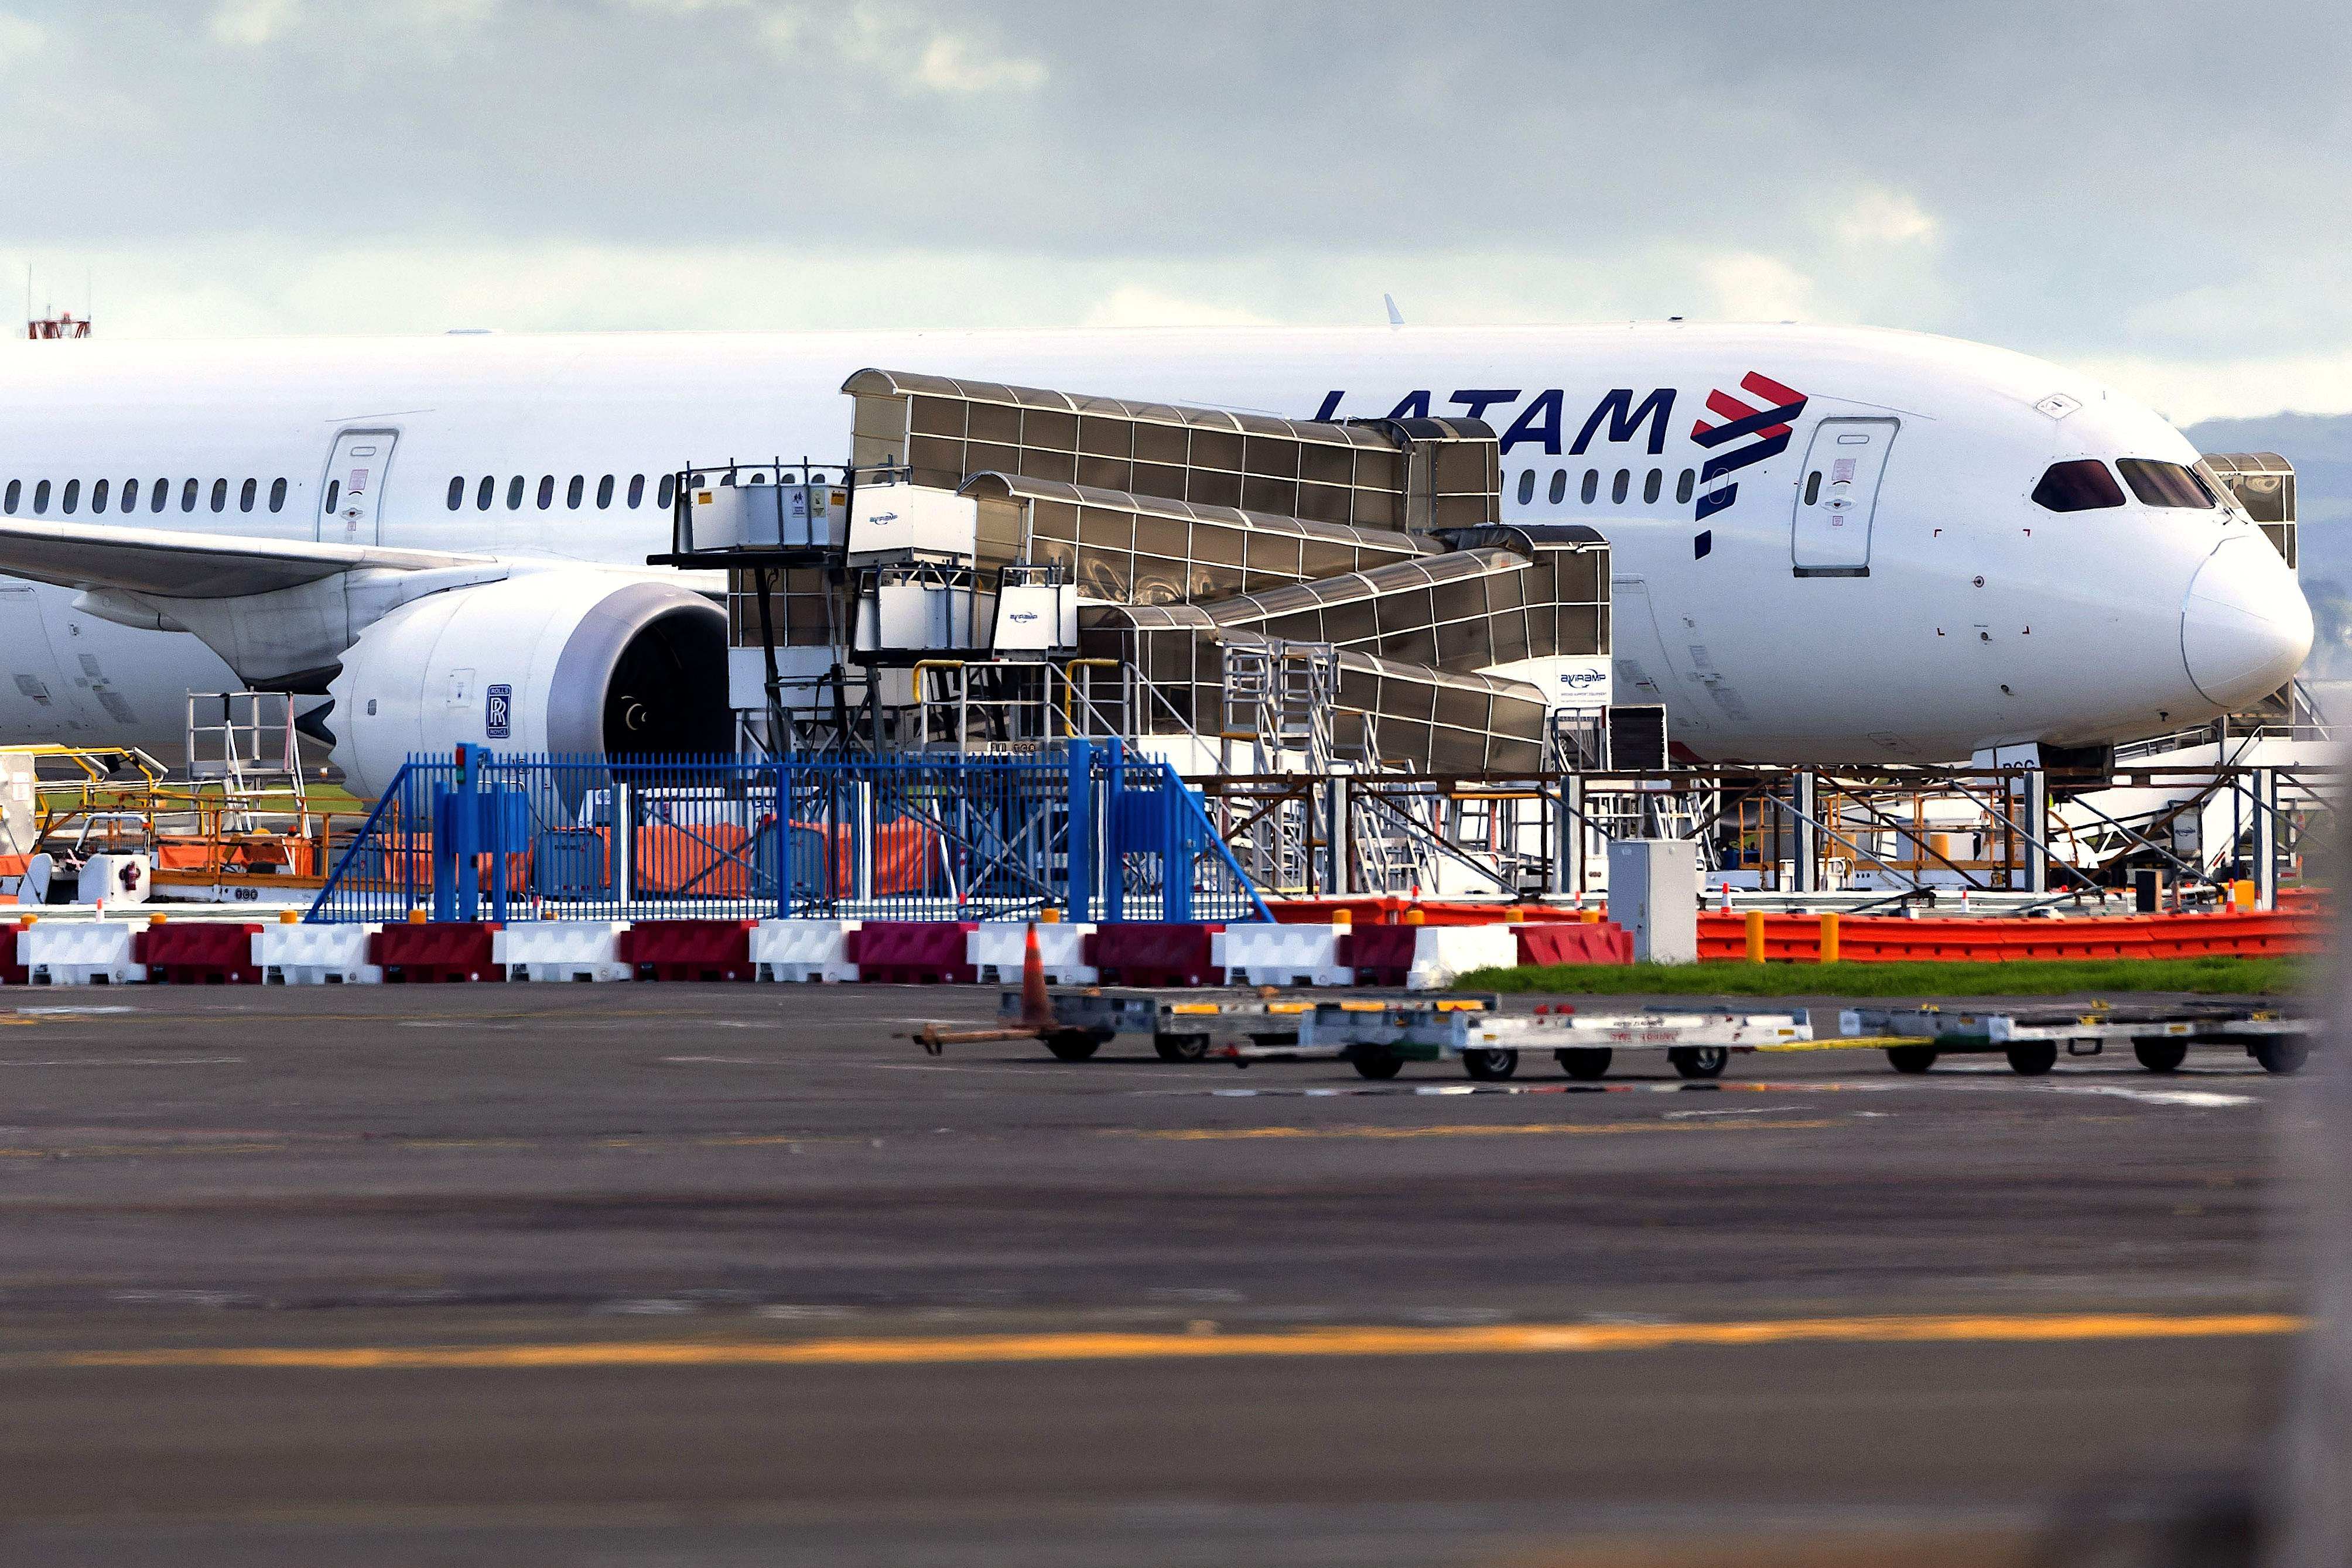 The Latam Airlines Boeing 787 Dreamliner plane that suddenly lost altitude mid-flight is parked on the tarmac of Auckland airport in New Zealand. Photo: AFP
